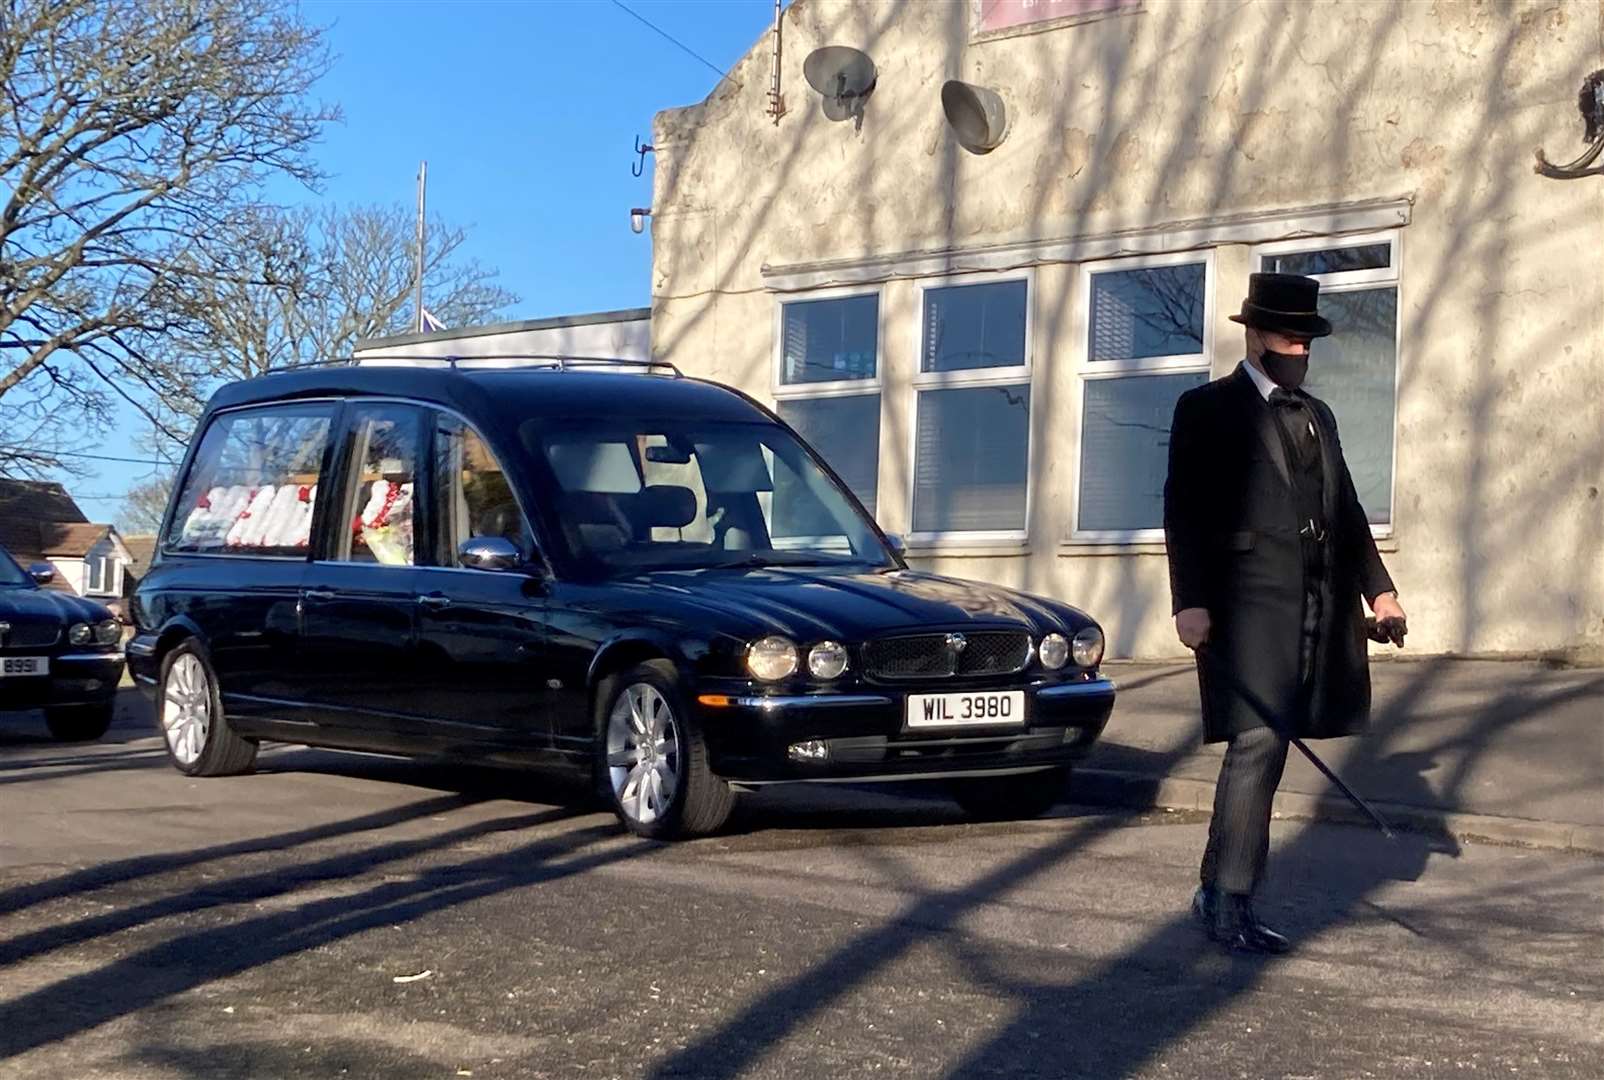 Sheppey EMUs founder David O'Neill's funeral at Minster Abbey